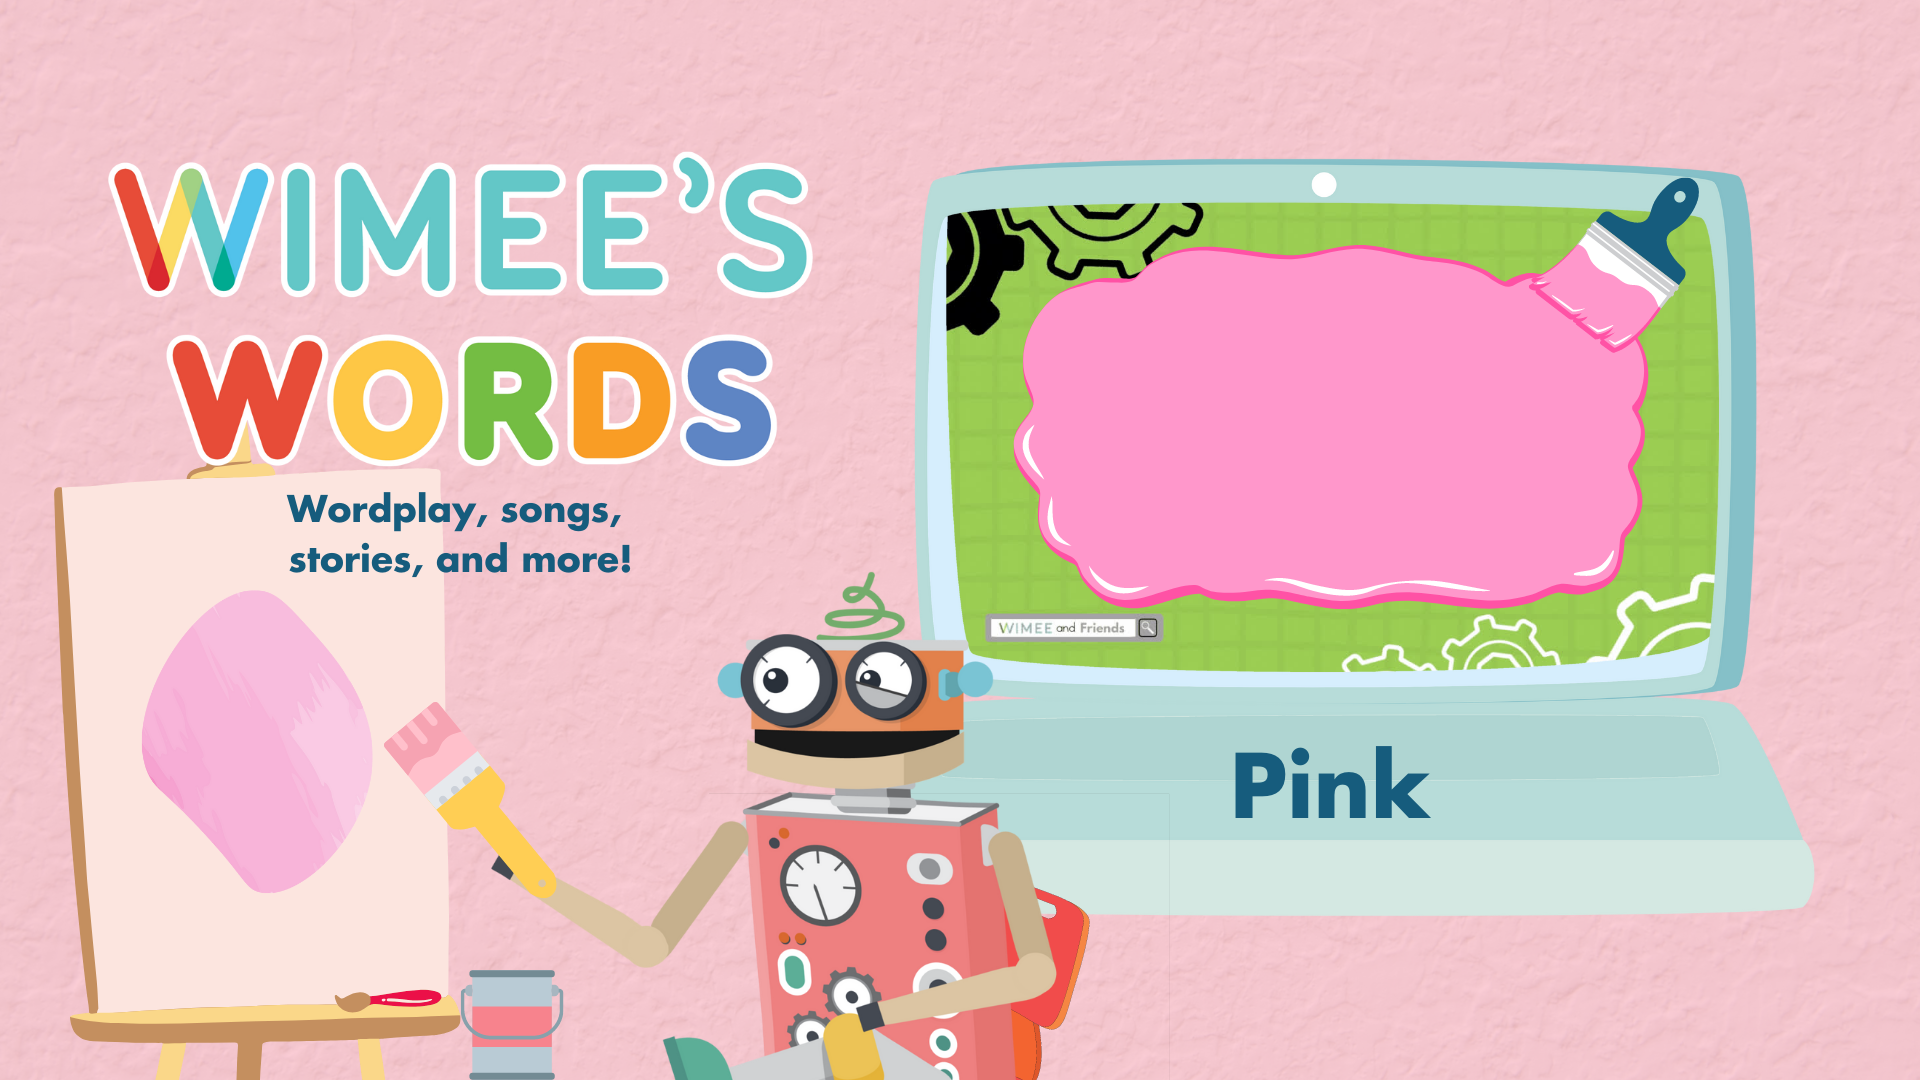 "Pink" Wimee's Words title card